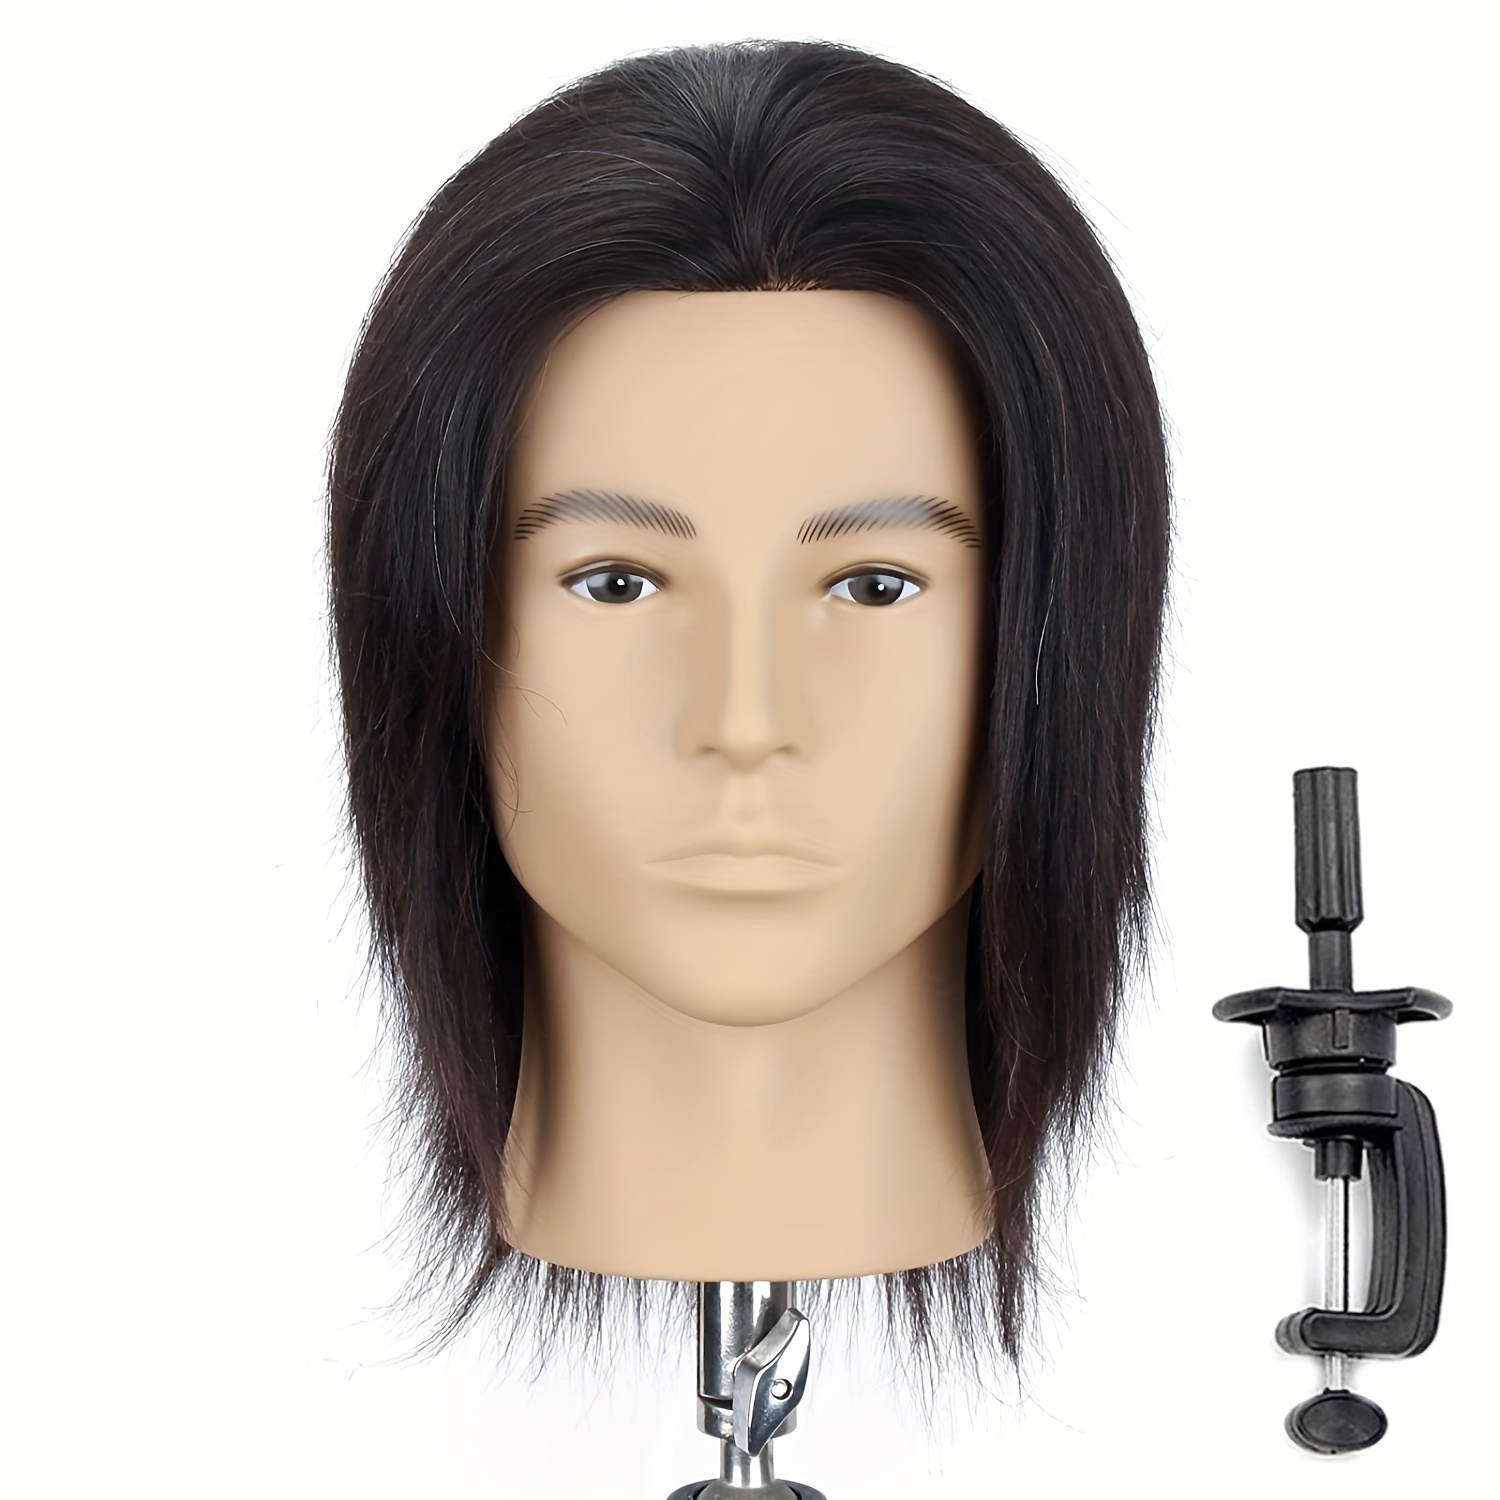 

100% Human Hair Mannequin Head Men's 8" Hairdresser Practice Beauty Styling Training Mannequin Head With Clamp Stand (natural Black)